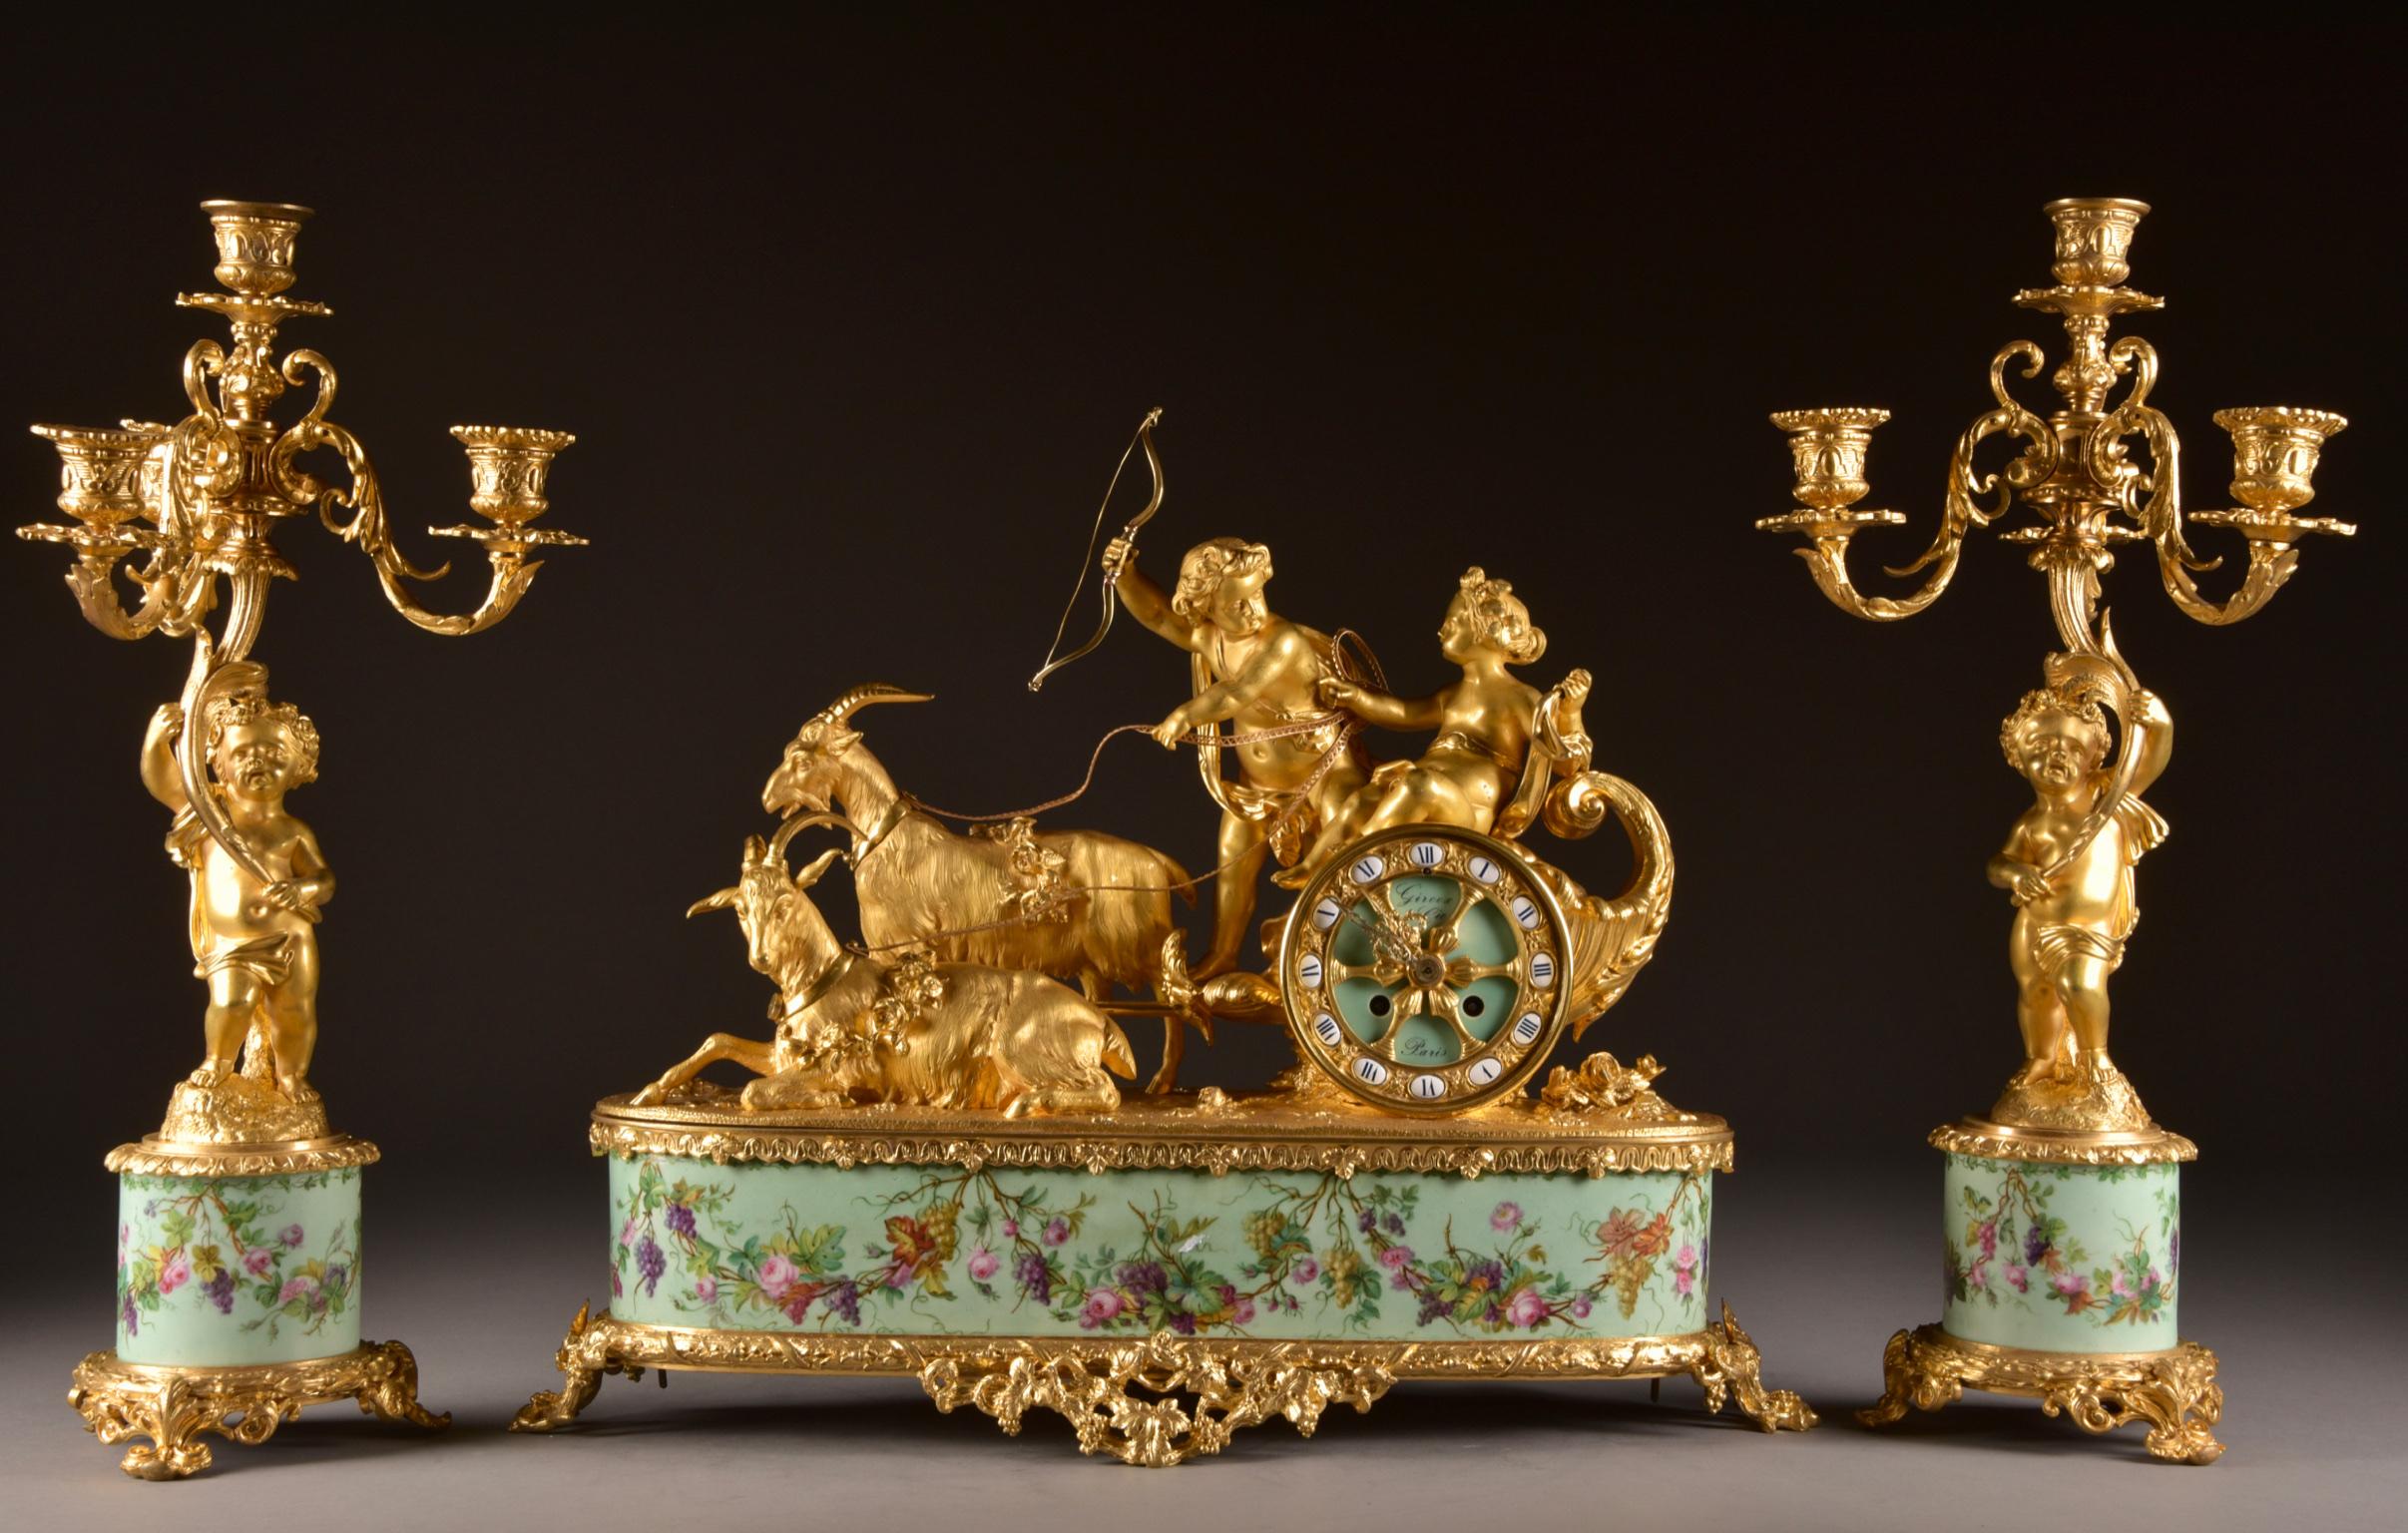 Very prestigious clock, and a pair of three-light candelabras by: Alphonse Giroux & Cie, 1855, made of fire-gilt bronze and romantic porcelain. Rare chariot surmounted by two putti on a goat-driven chariot. The time piece stamp is from: Japy Frères